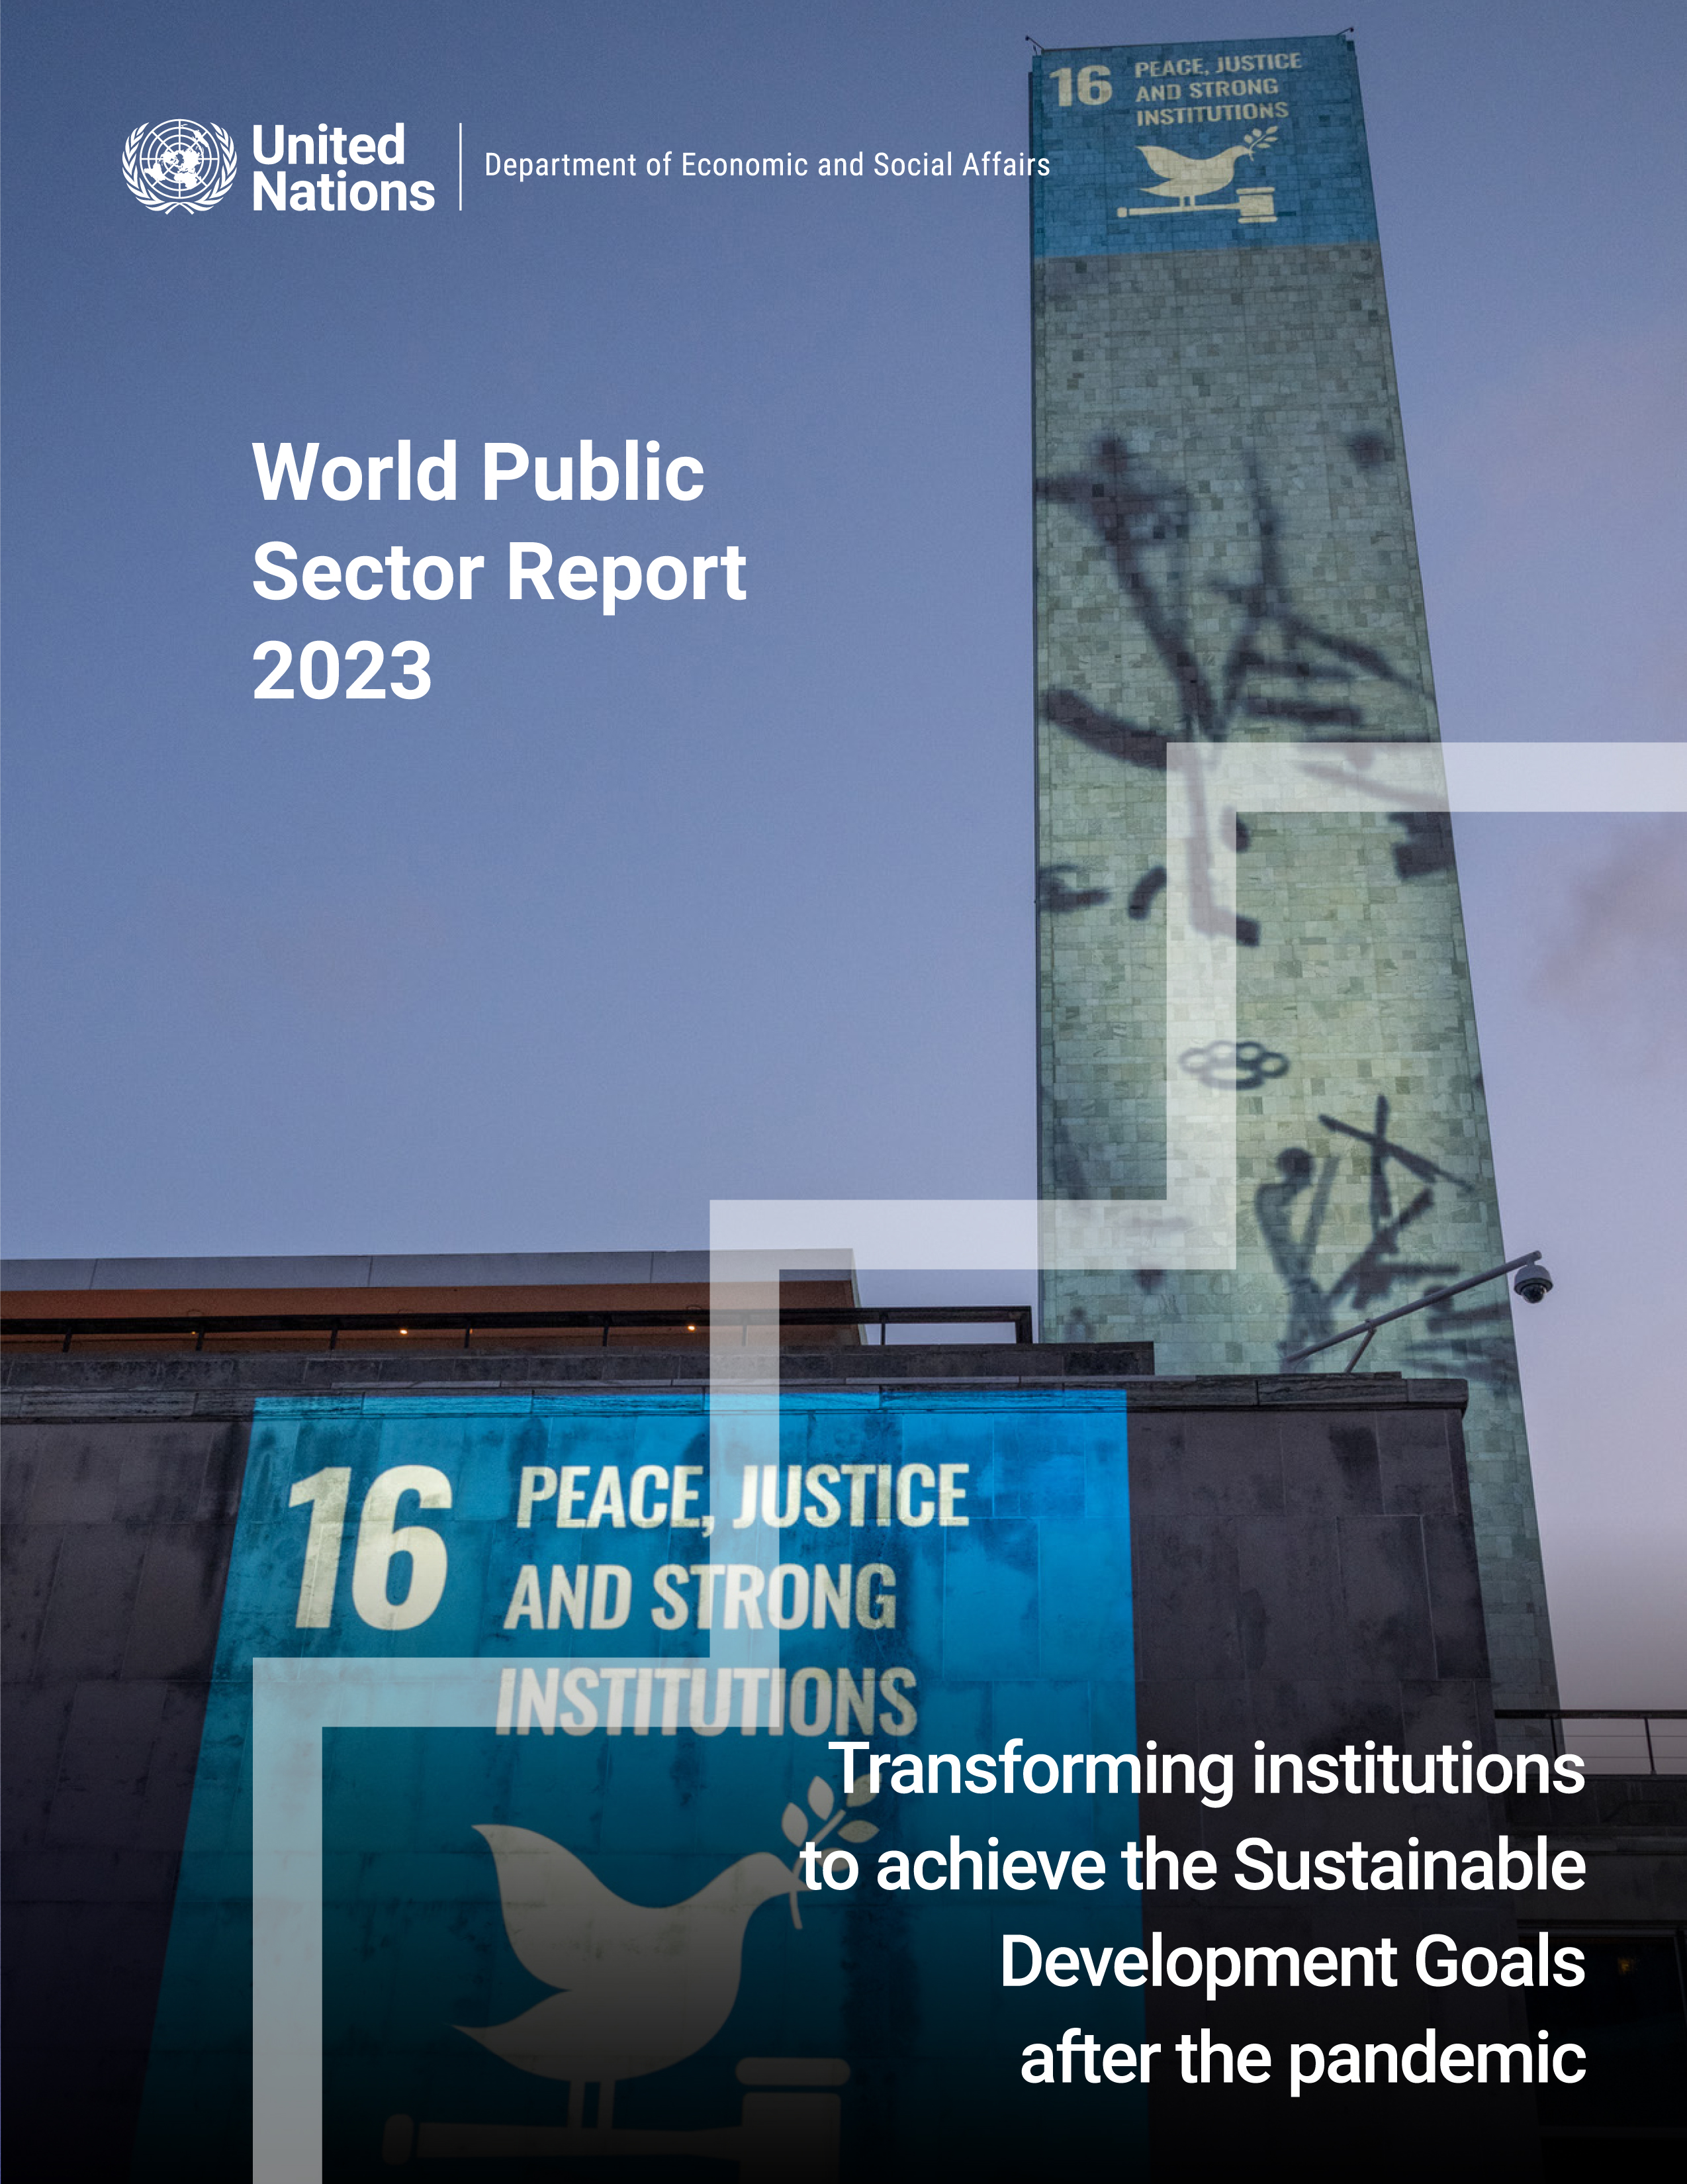 image of World Public Sector Report 2023